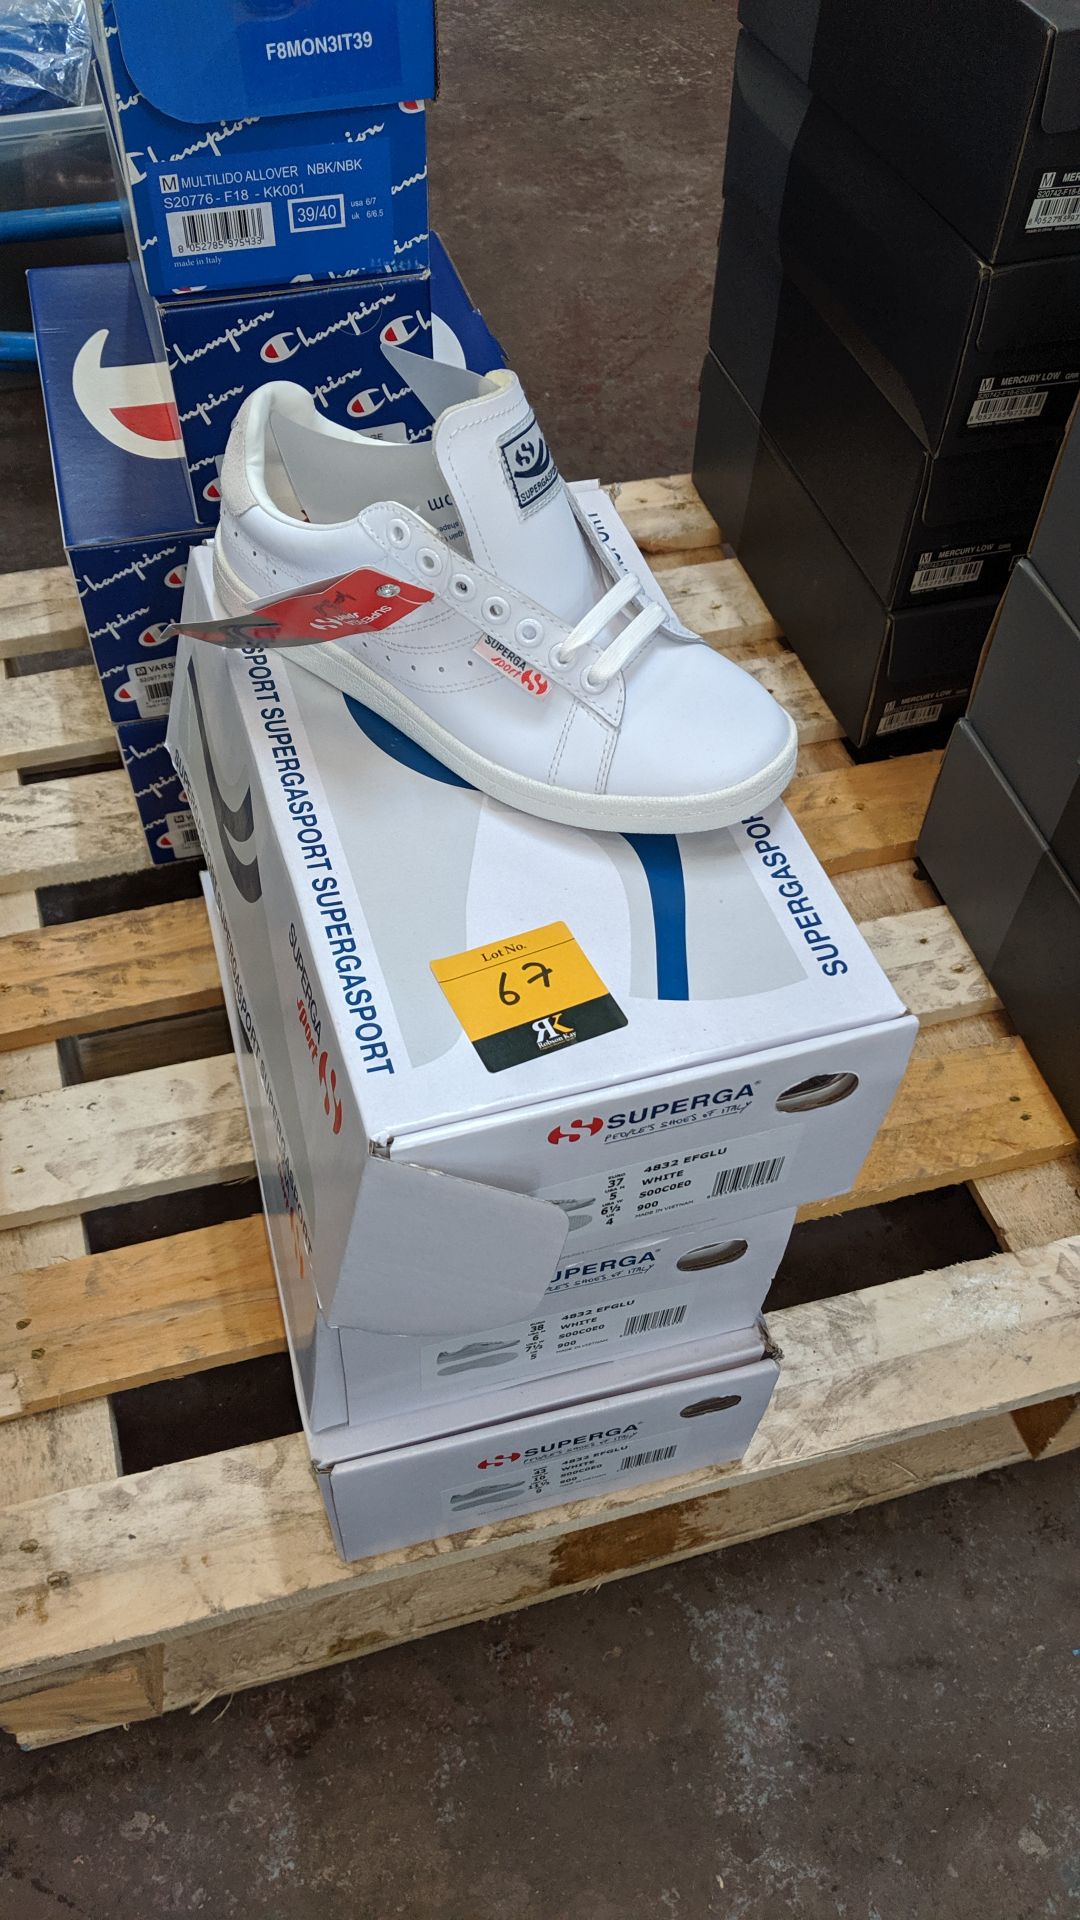 3 pairs of Superga trainers. This is one of a number of lots being sold on behalf of the liquidators